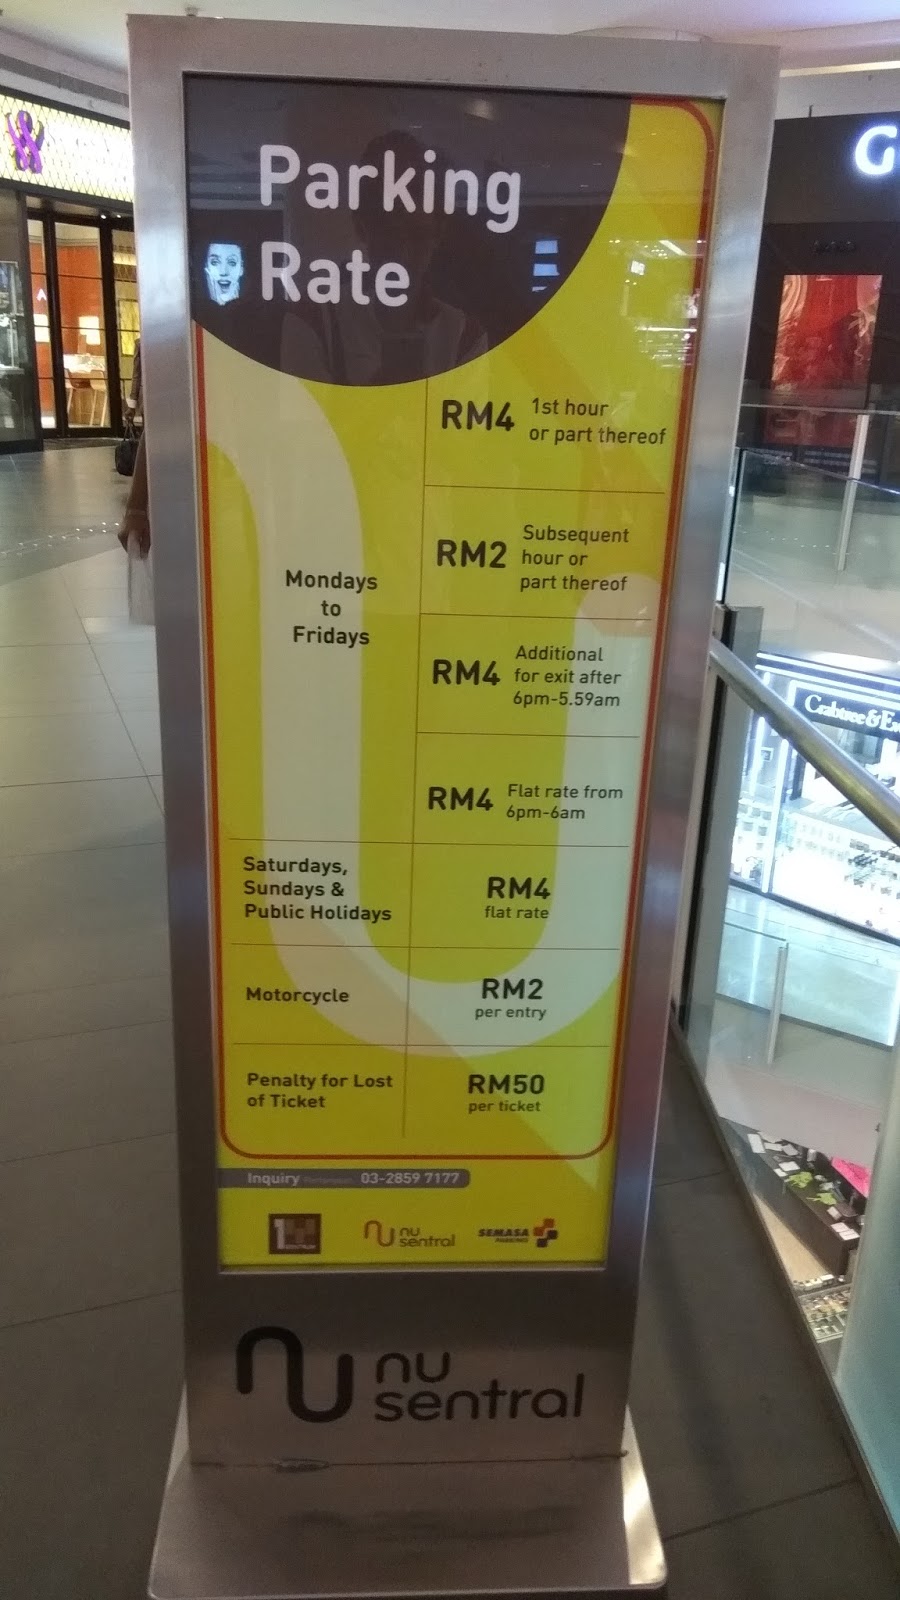 Parking Rate Fee Charges: NU Sentral Mall & 1 Sentrum Parking